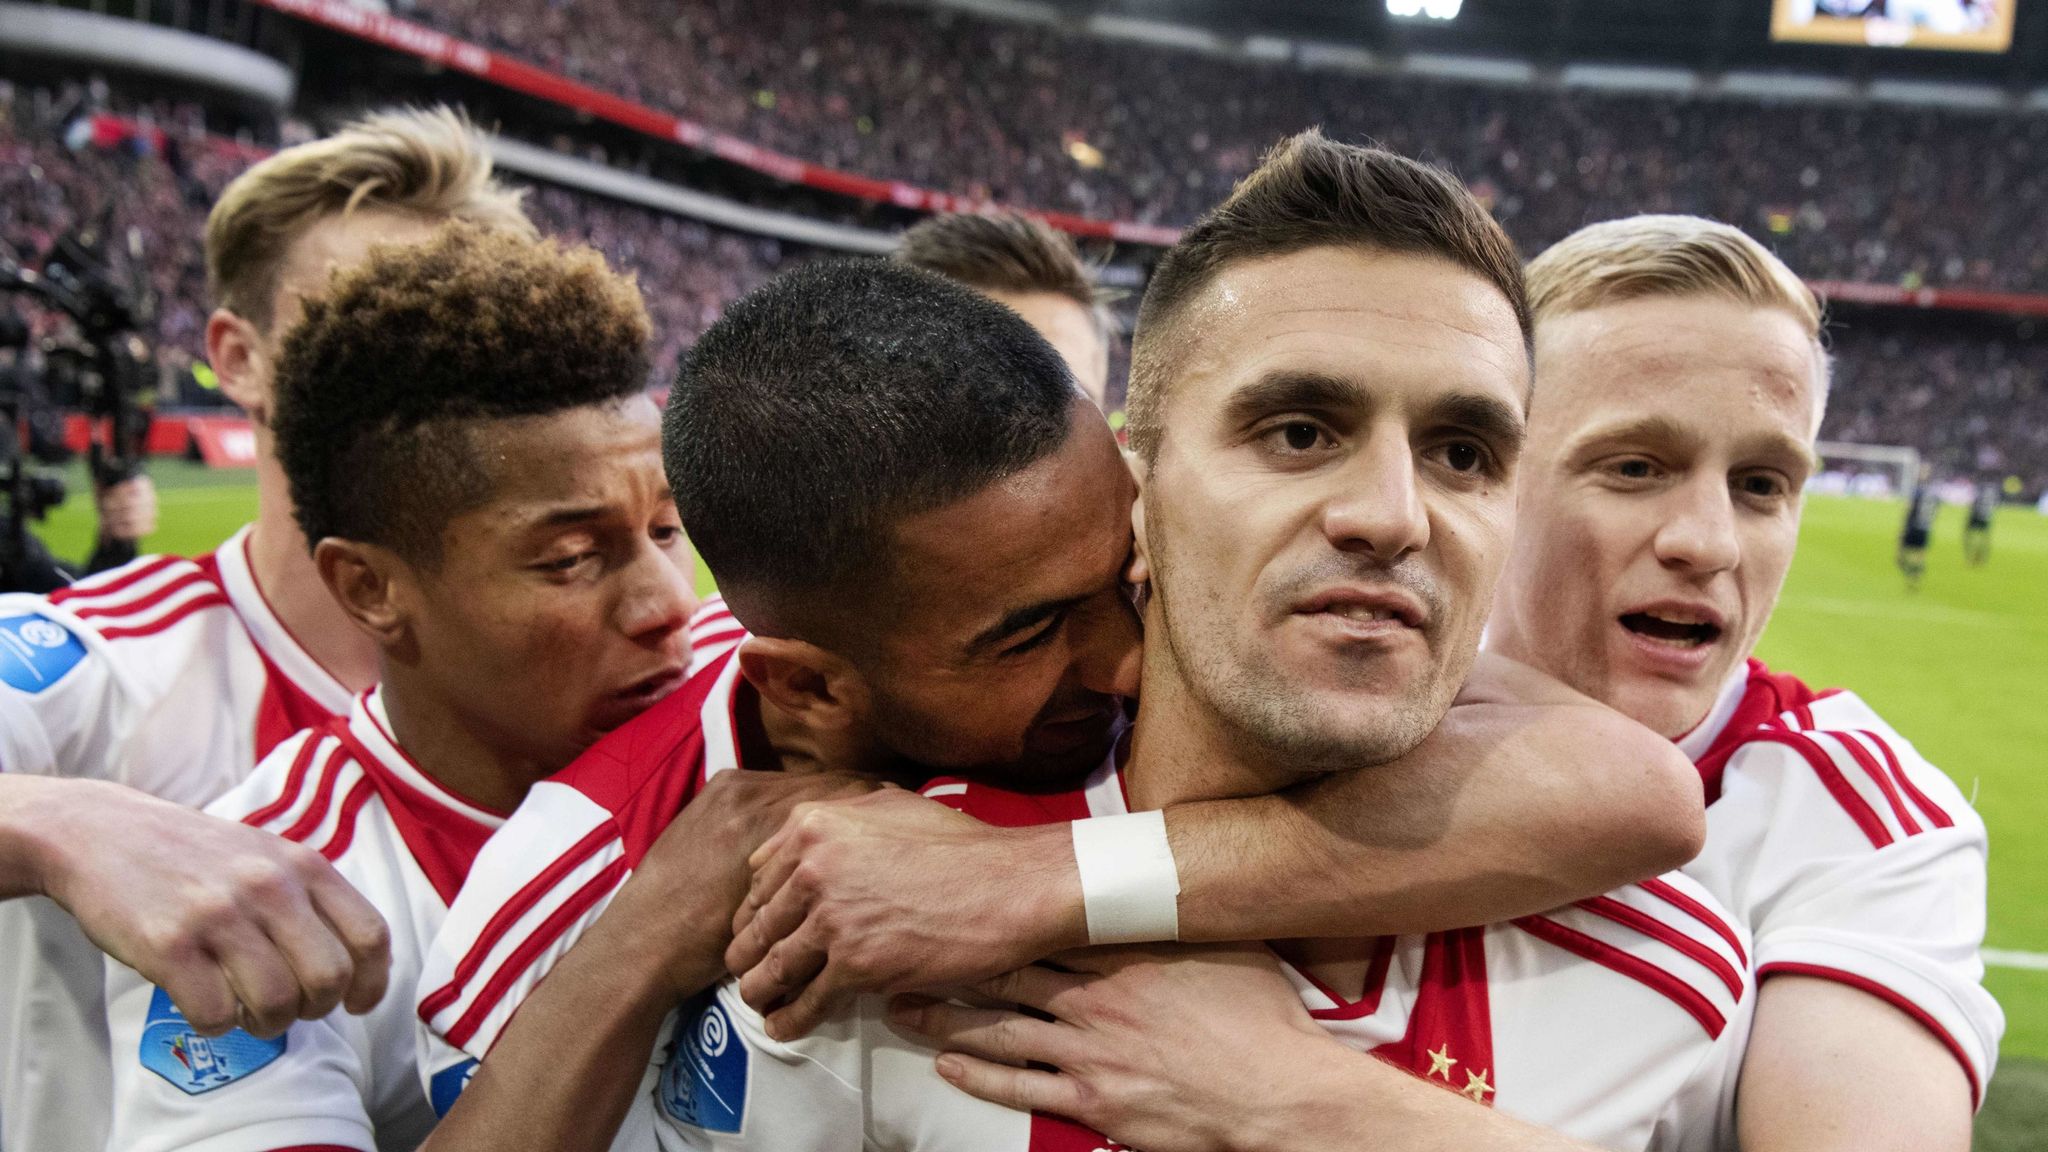 Ajax win Dutch Eredivisie championship with 3-1 victory over FC